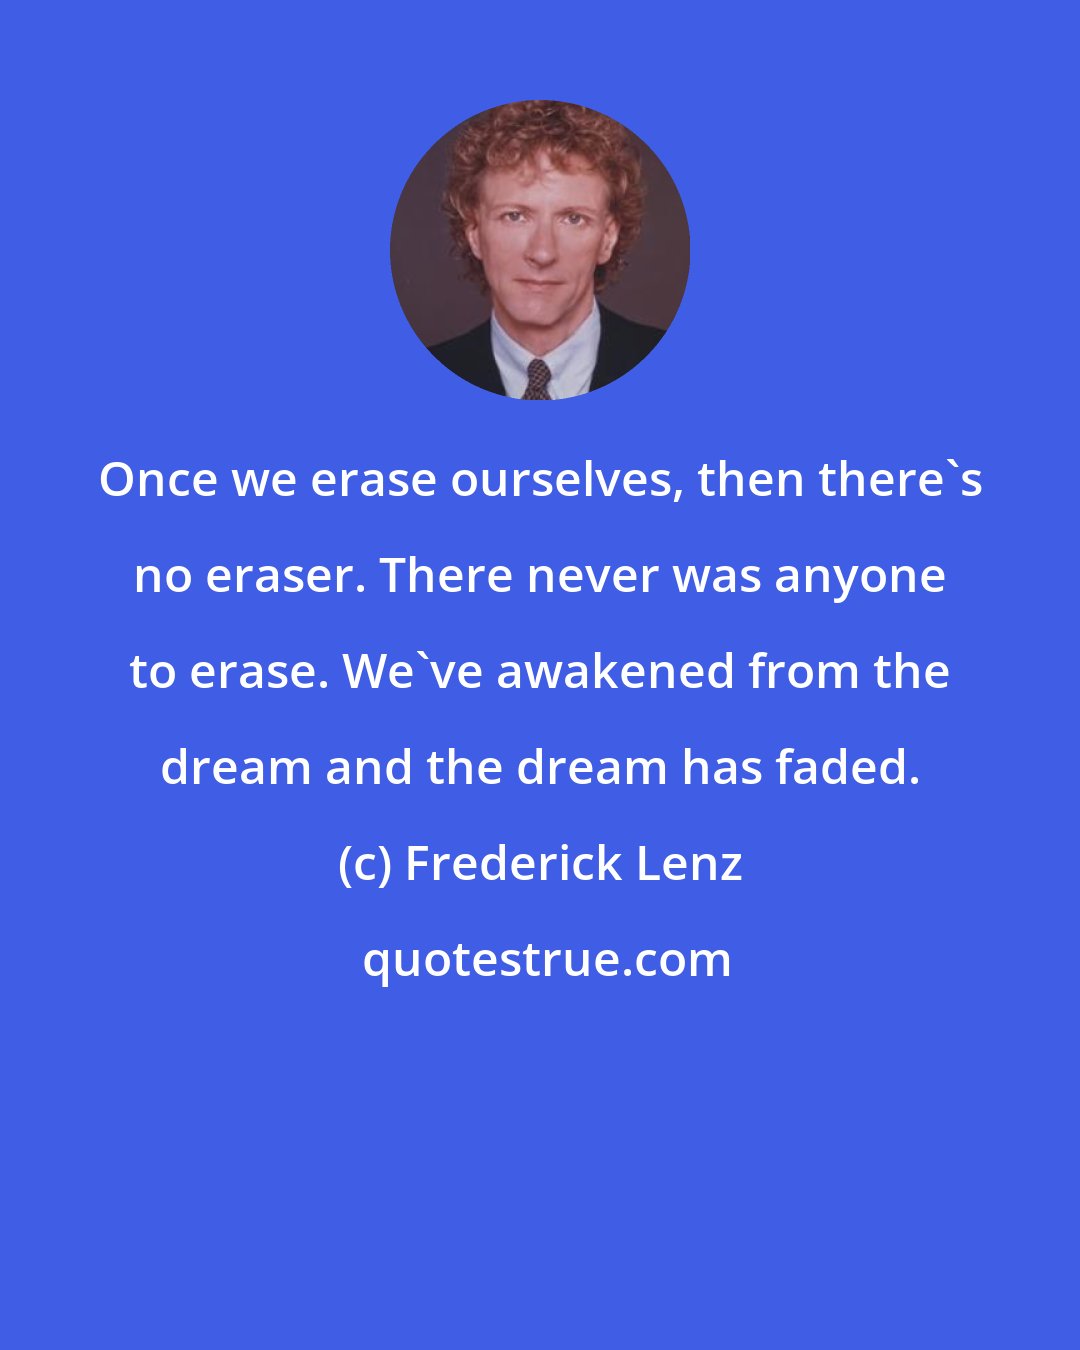 Frederick Lenz: Once we erase ourselves, then there's no eraser. There never was anyone to erase. We've awakened from the dream and the dream has faded.